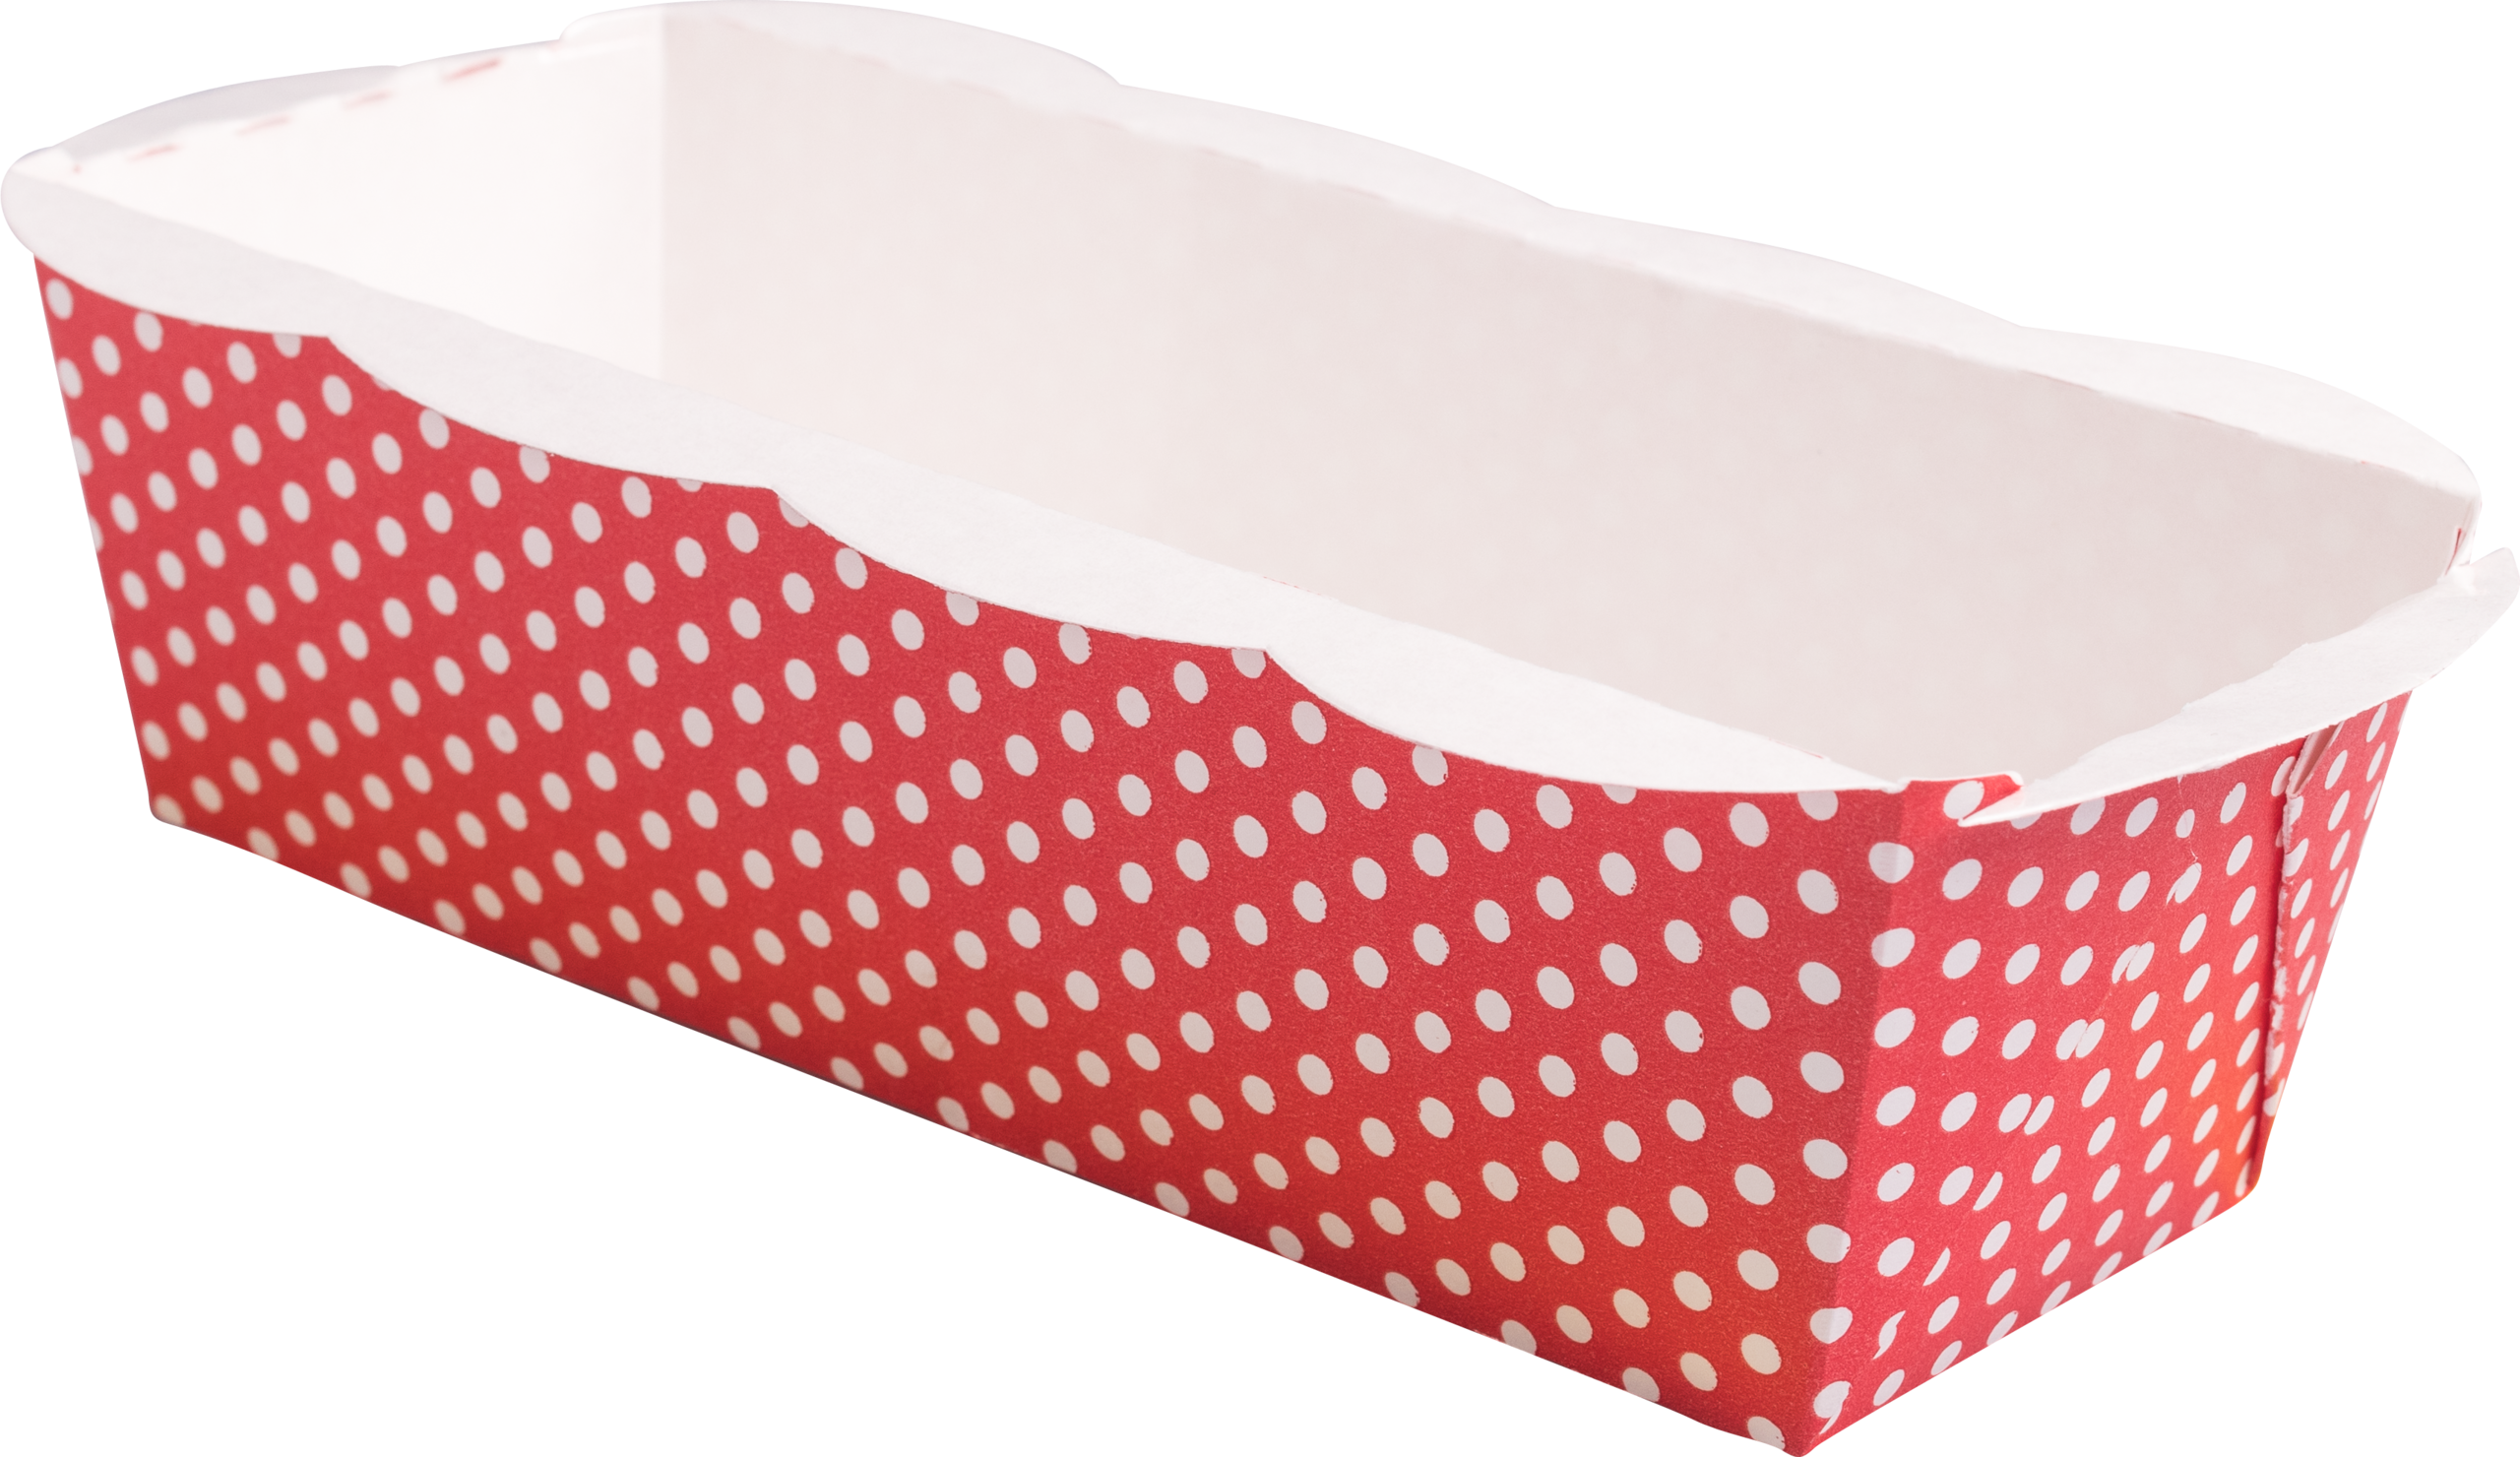 XL baking moulds white dots on red